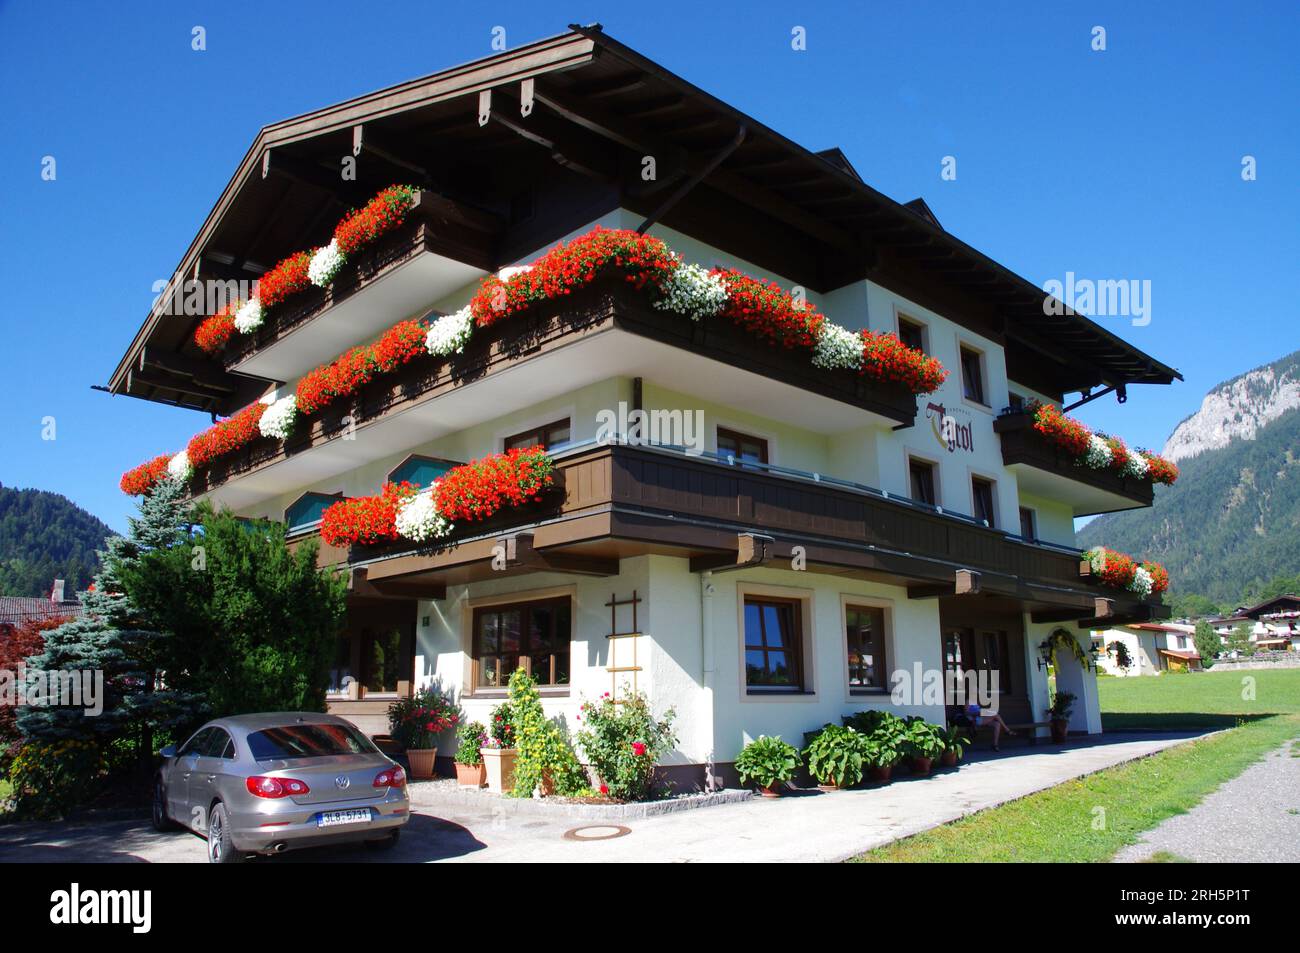 Söll, Austria, Typical Austrian Wooden buuilding with red and white flower baskets. Hotel Tyrol, Söll. Stock Photo